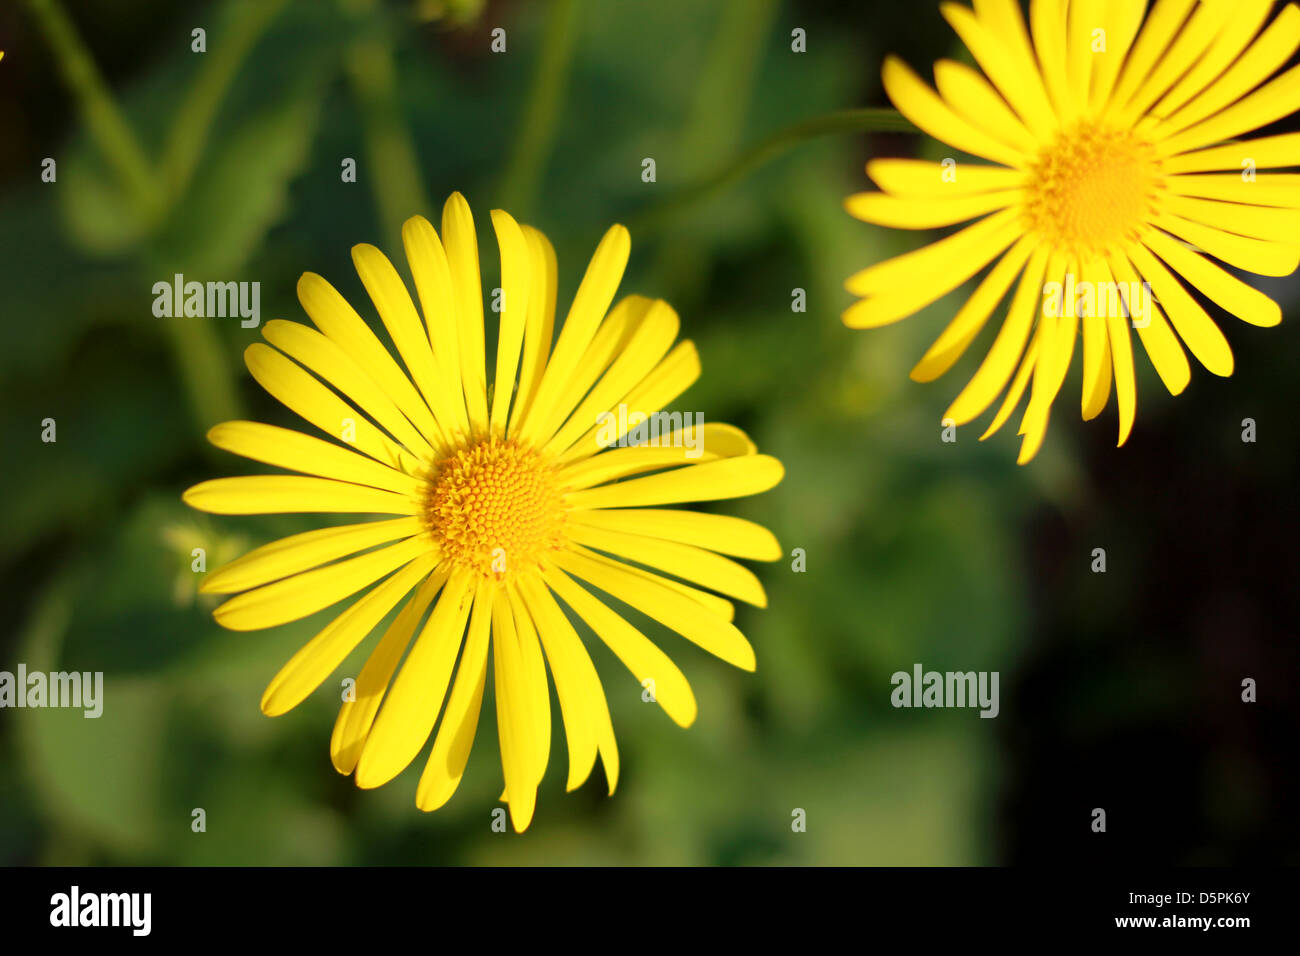 Two bright-yellow sun-like flowers on the blurred vegetation background Stock Photo